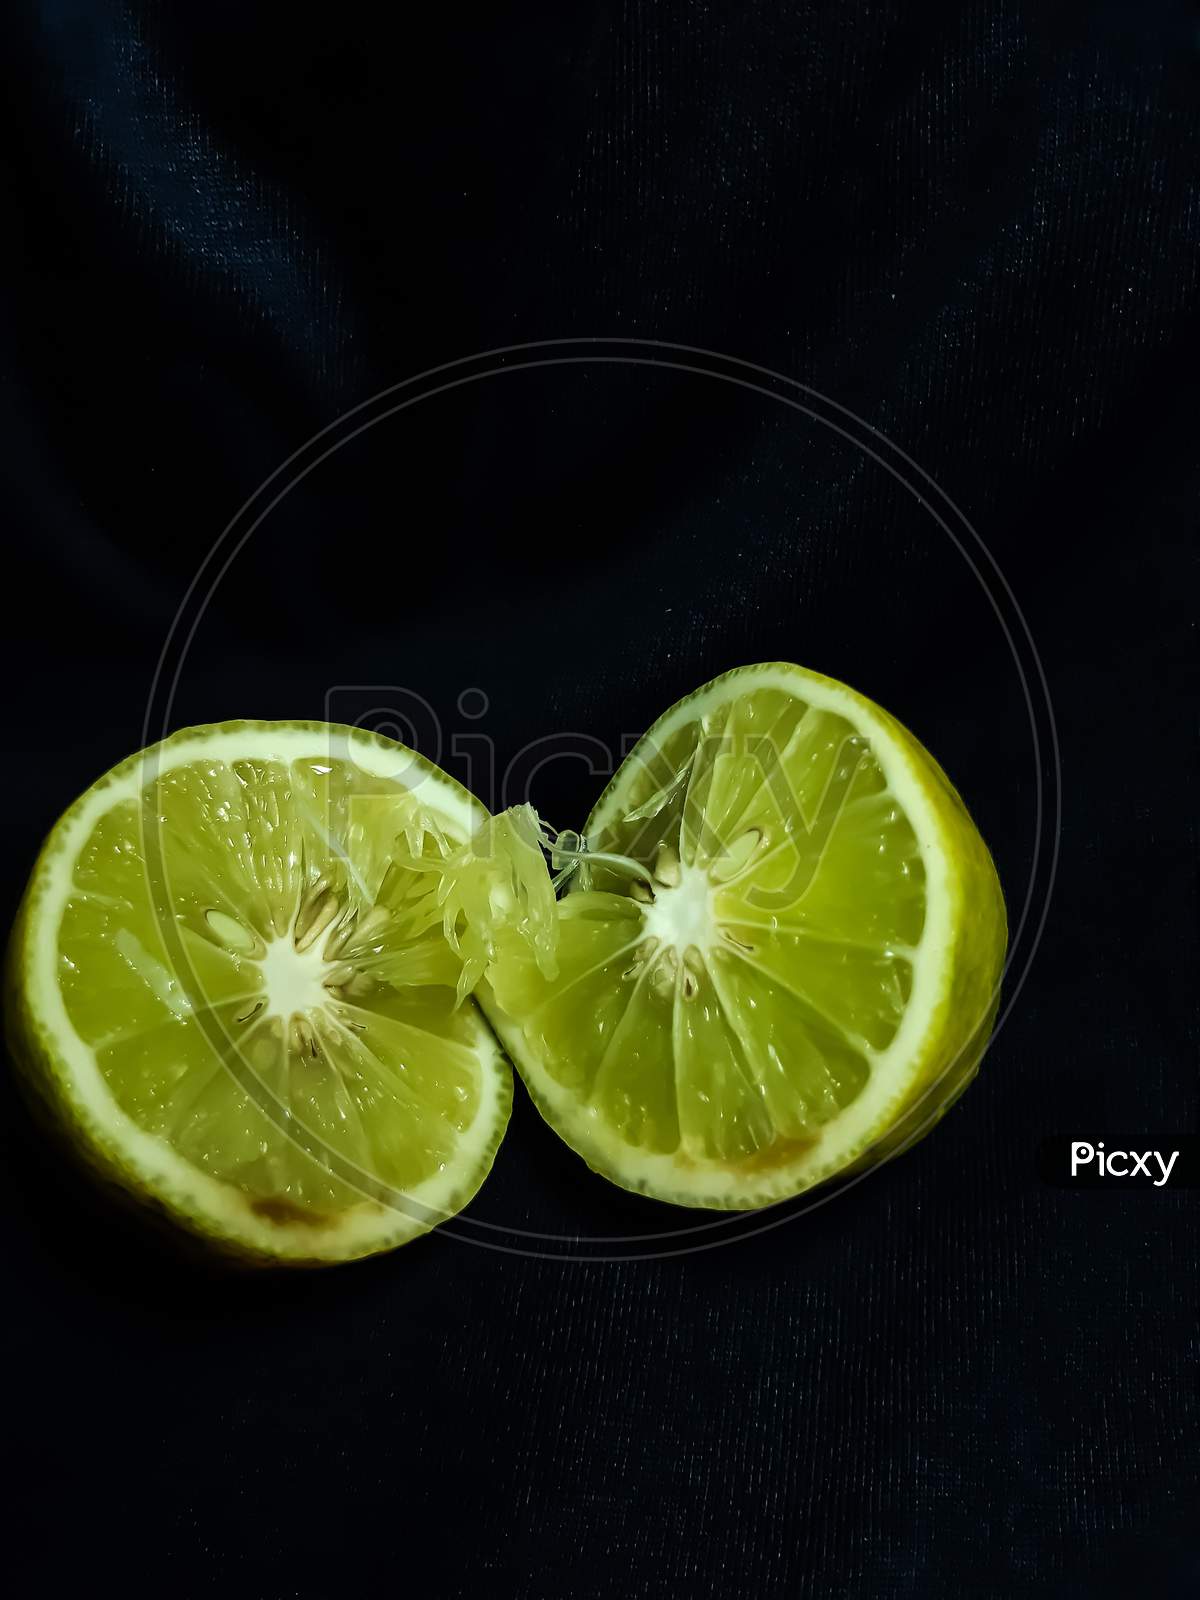 A Lemon Is Cut In The Middle And It Is On A Black Background.